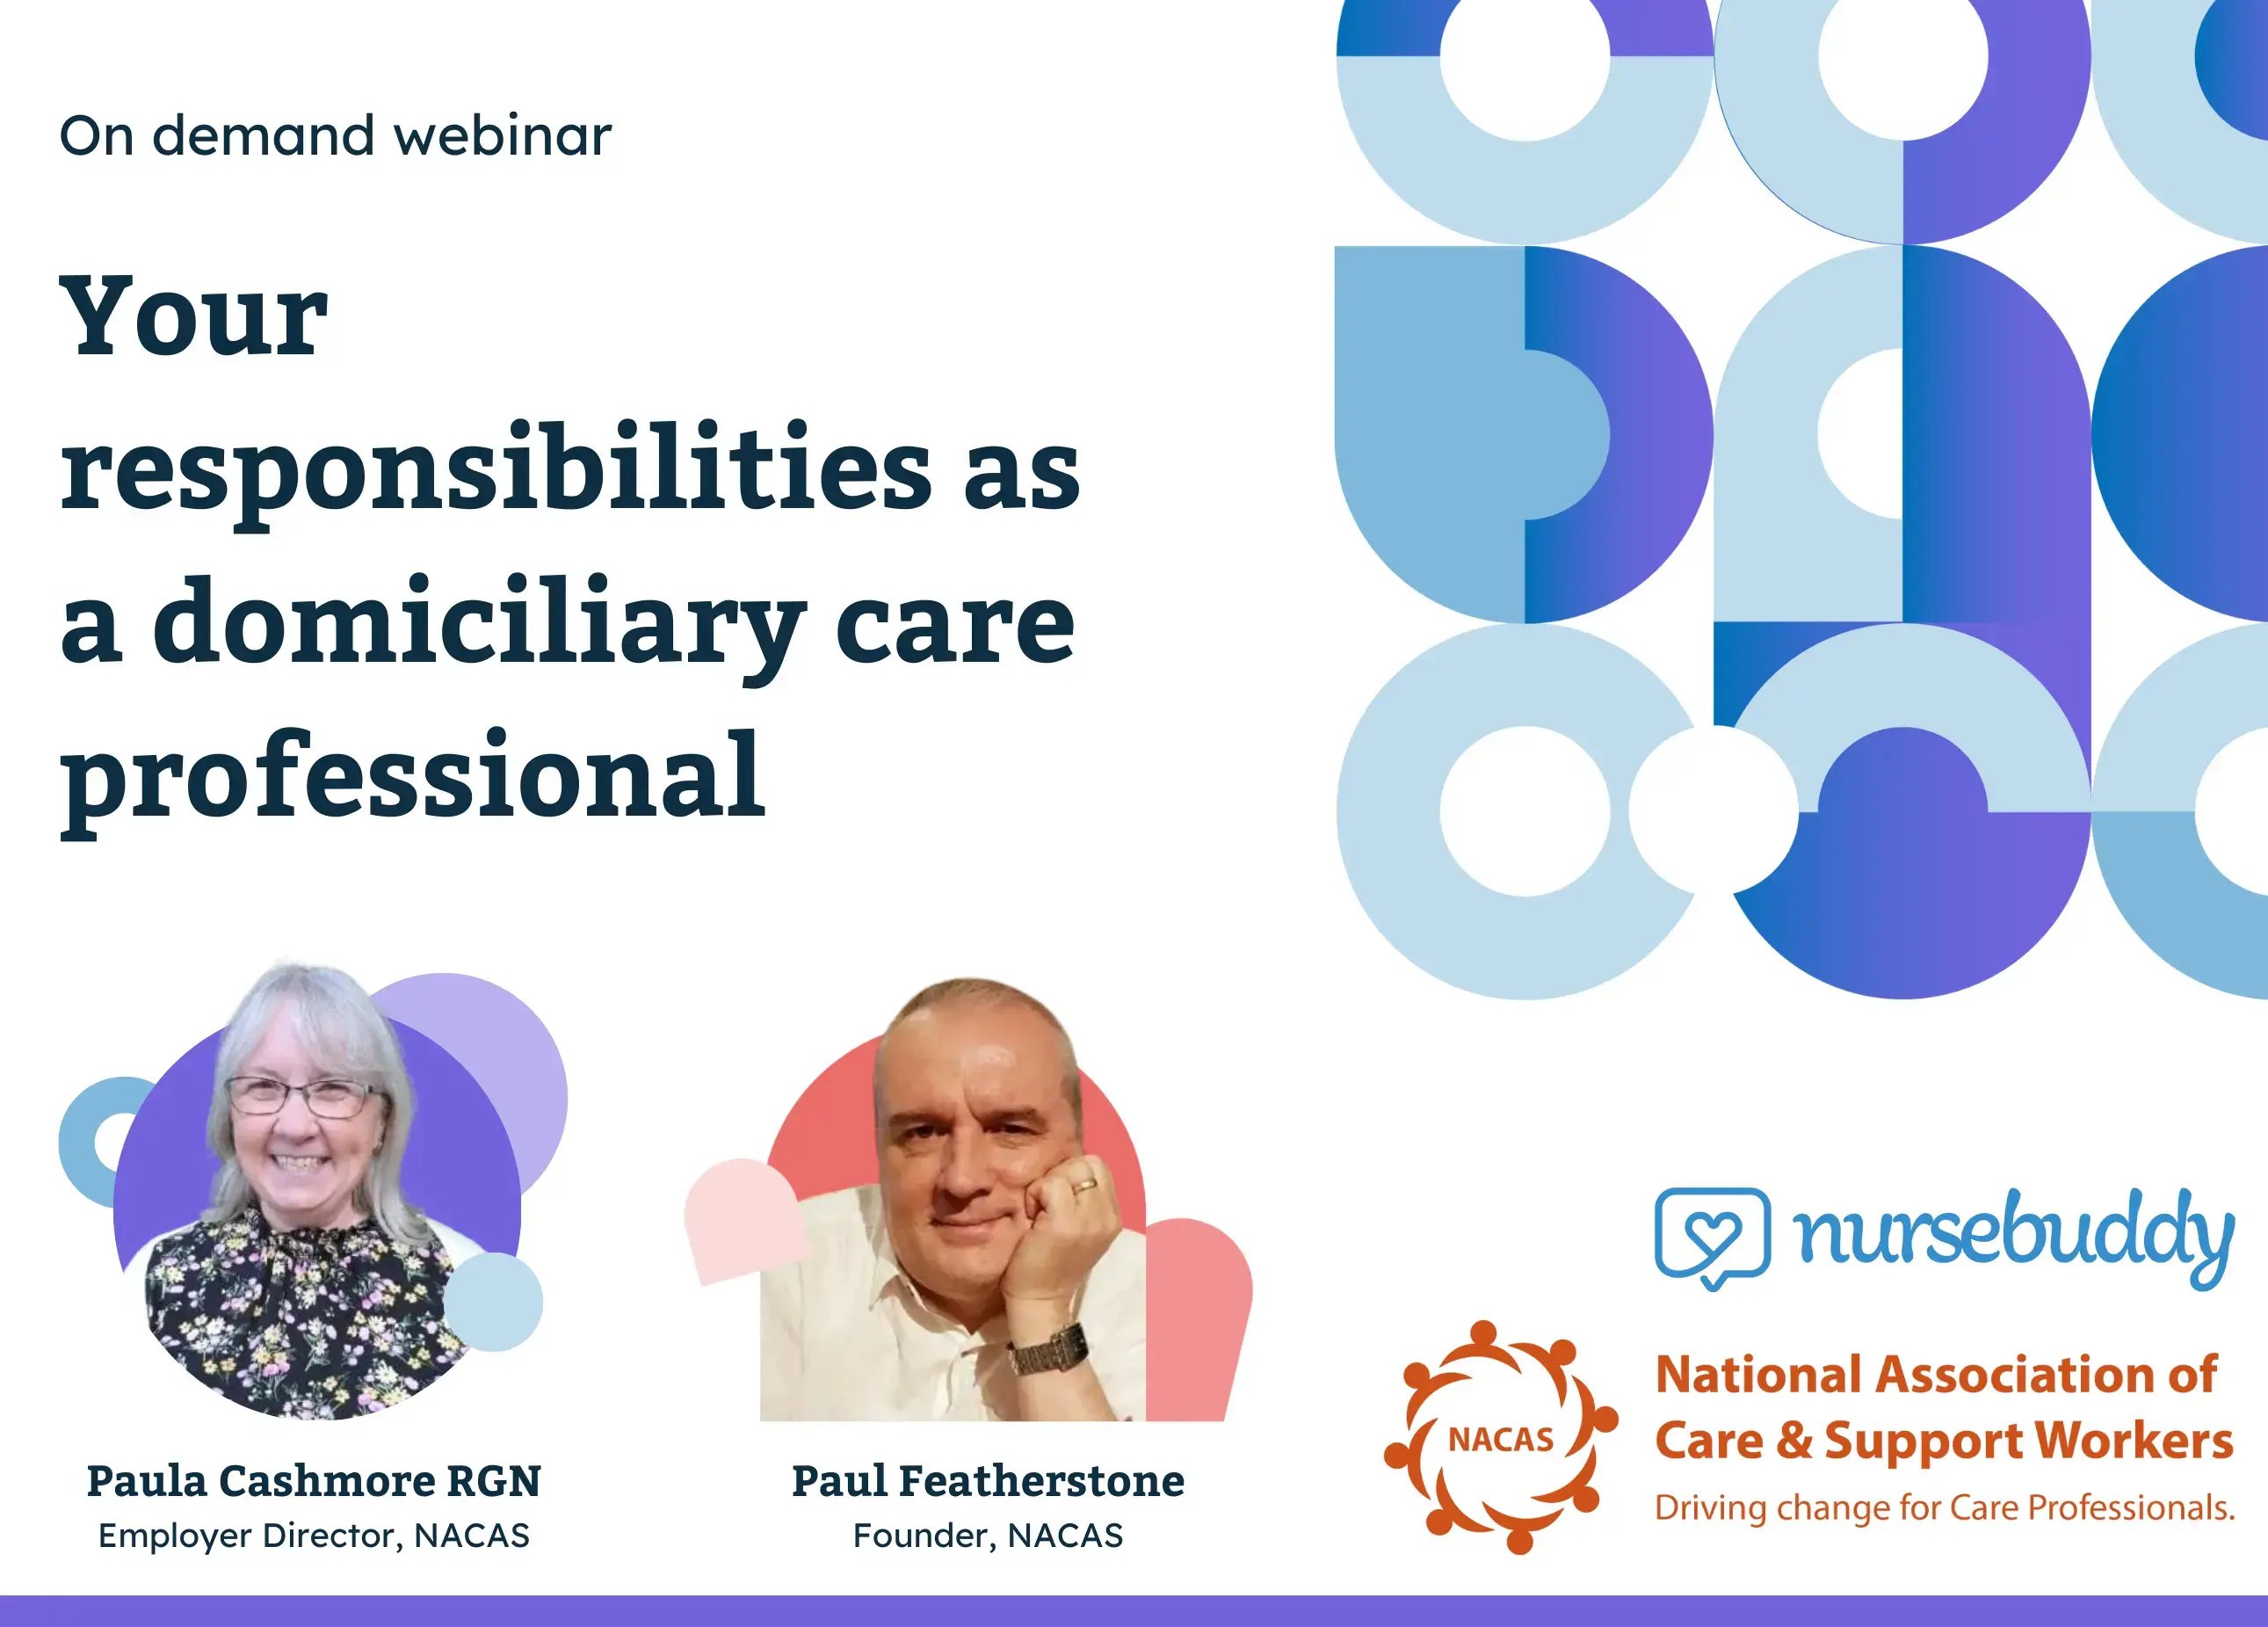 Your responsibilities as a domiciliary care professional - a webinar from Nursebuddy with NACAS